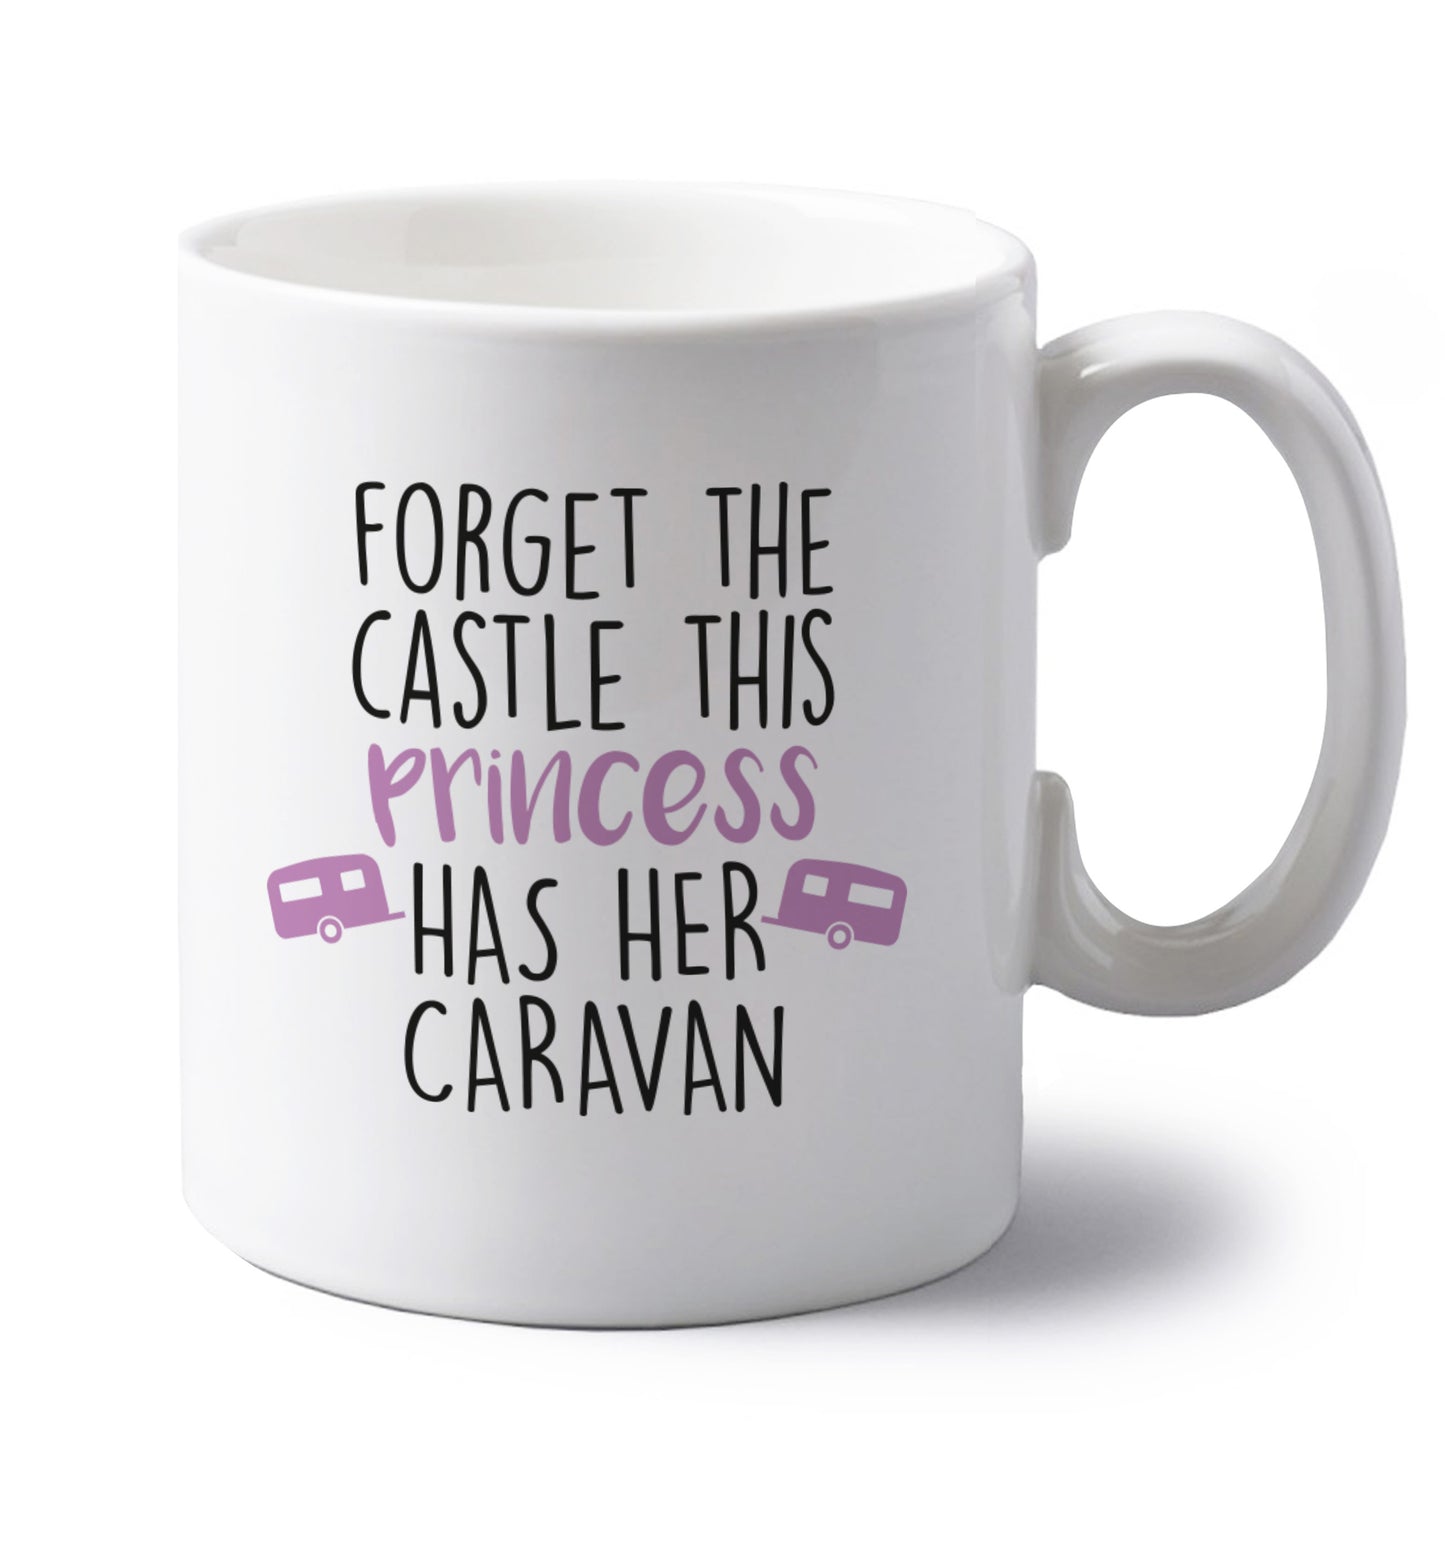 Forget the castle this princess lives at the caravan left handed white ceramic mug 